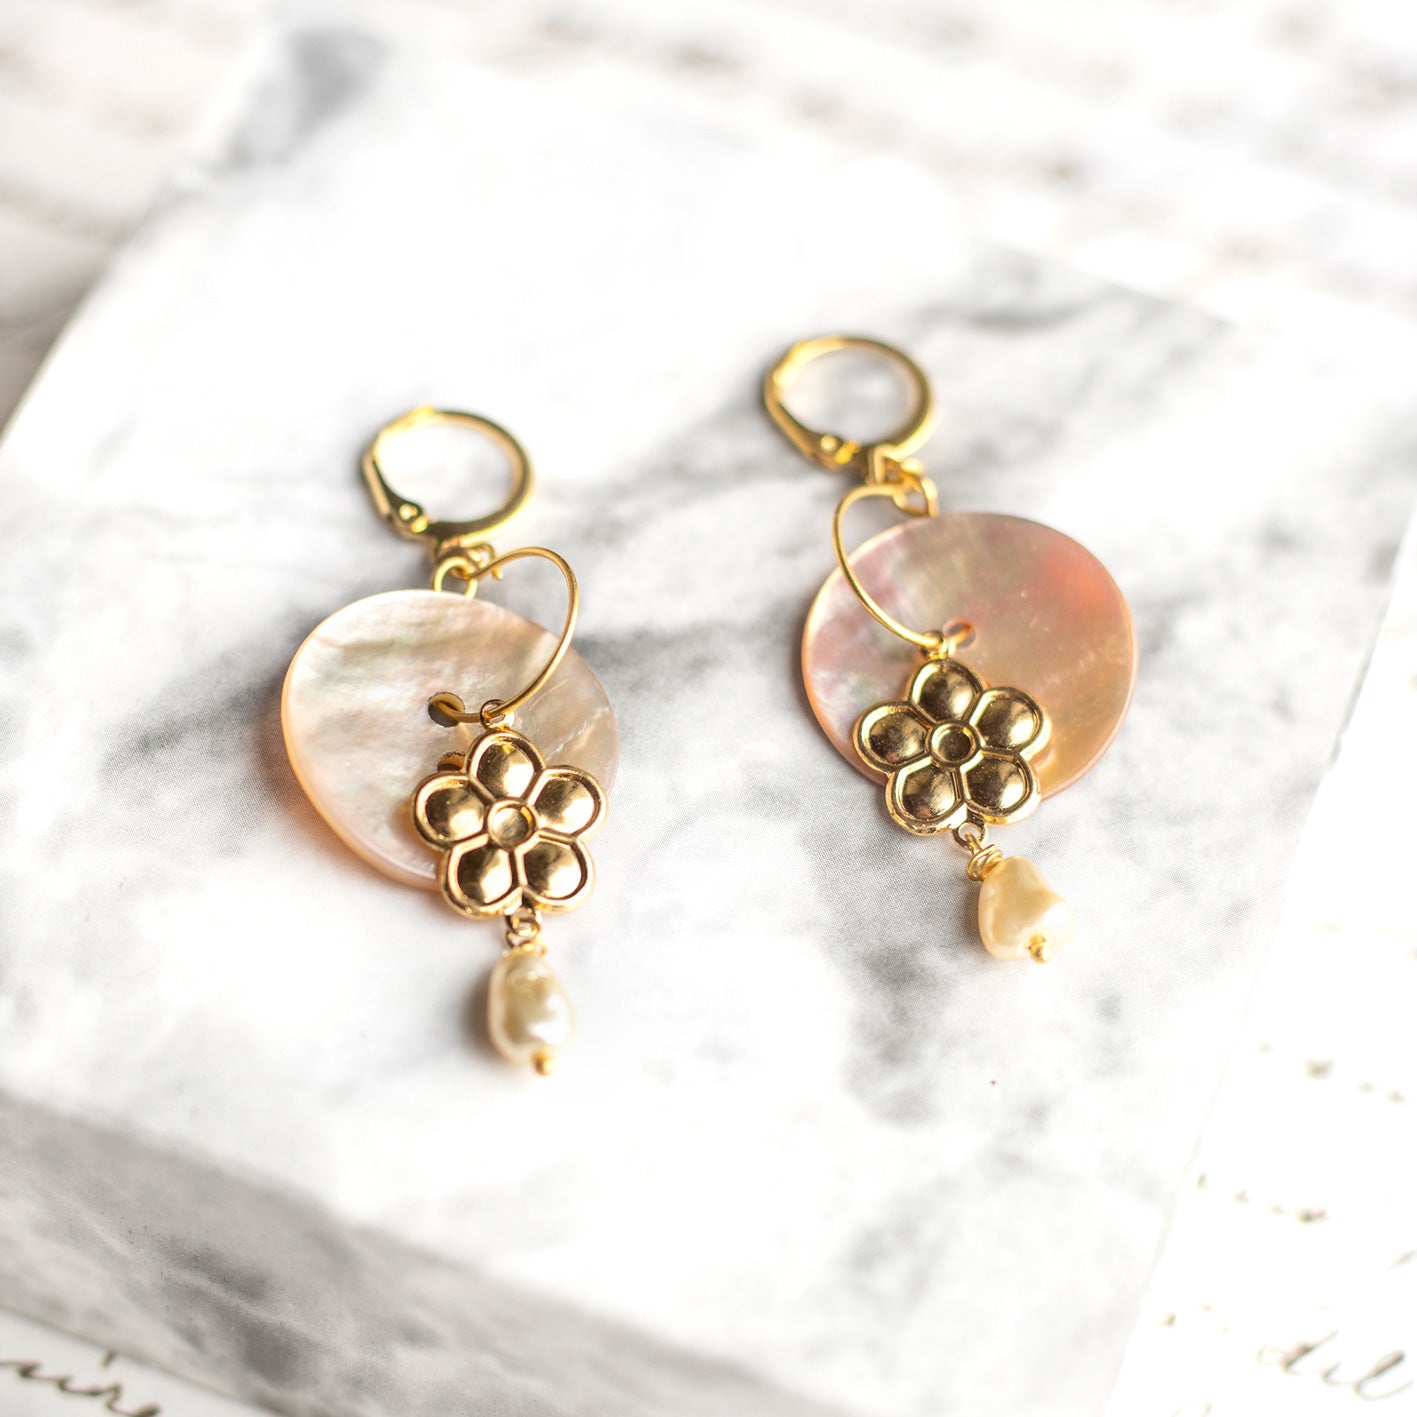 Pink mother-of-pearl button and freshwater pearl earrings